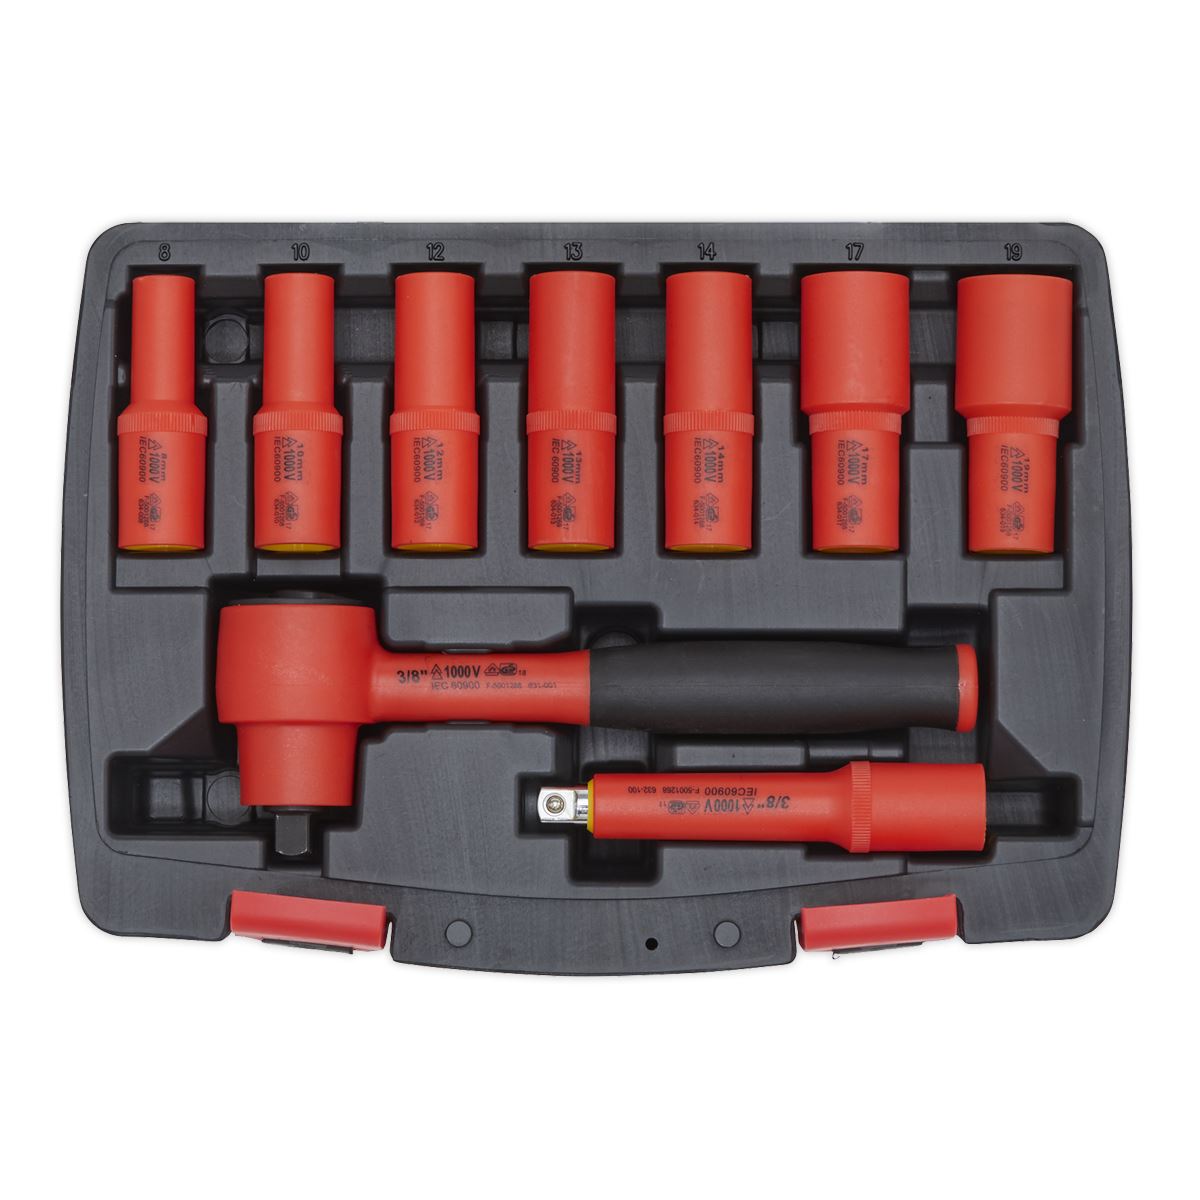 Sealey Premier Insulated Socket Set 9pc 3/8"Sq Drive 6pt WallDrive® VDE Approved